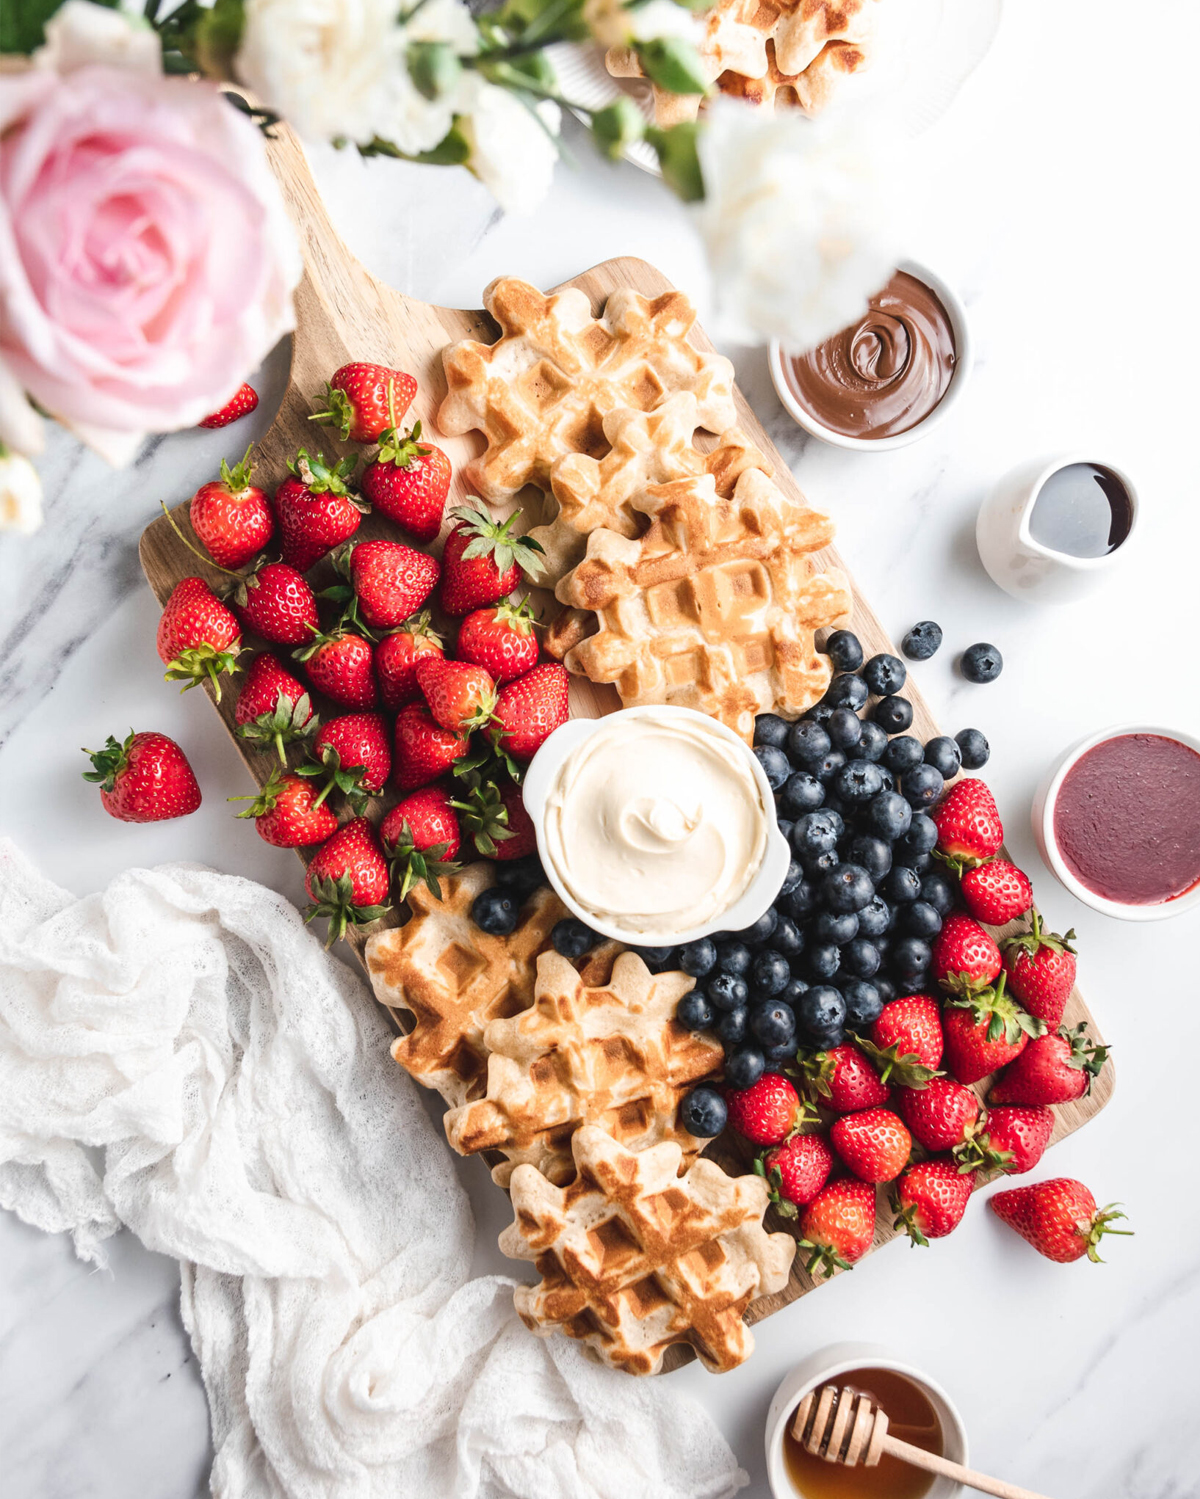 baked by Chichi created a waffle board with full strawberries, nutella, blueberries and plenty of sweet toppings. 